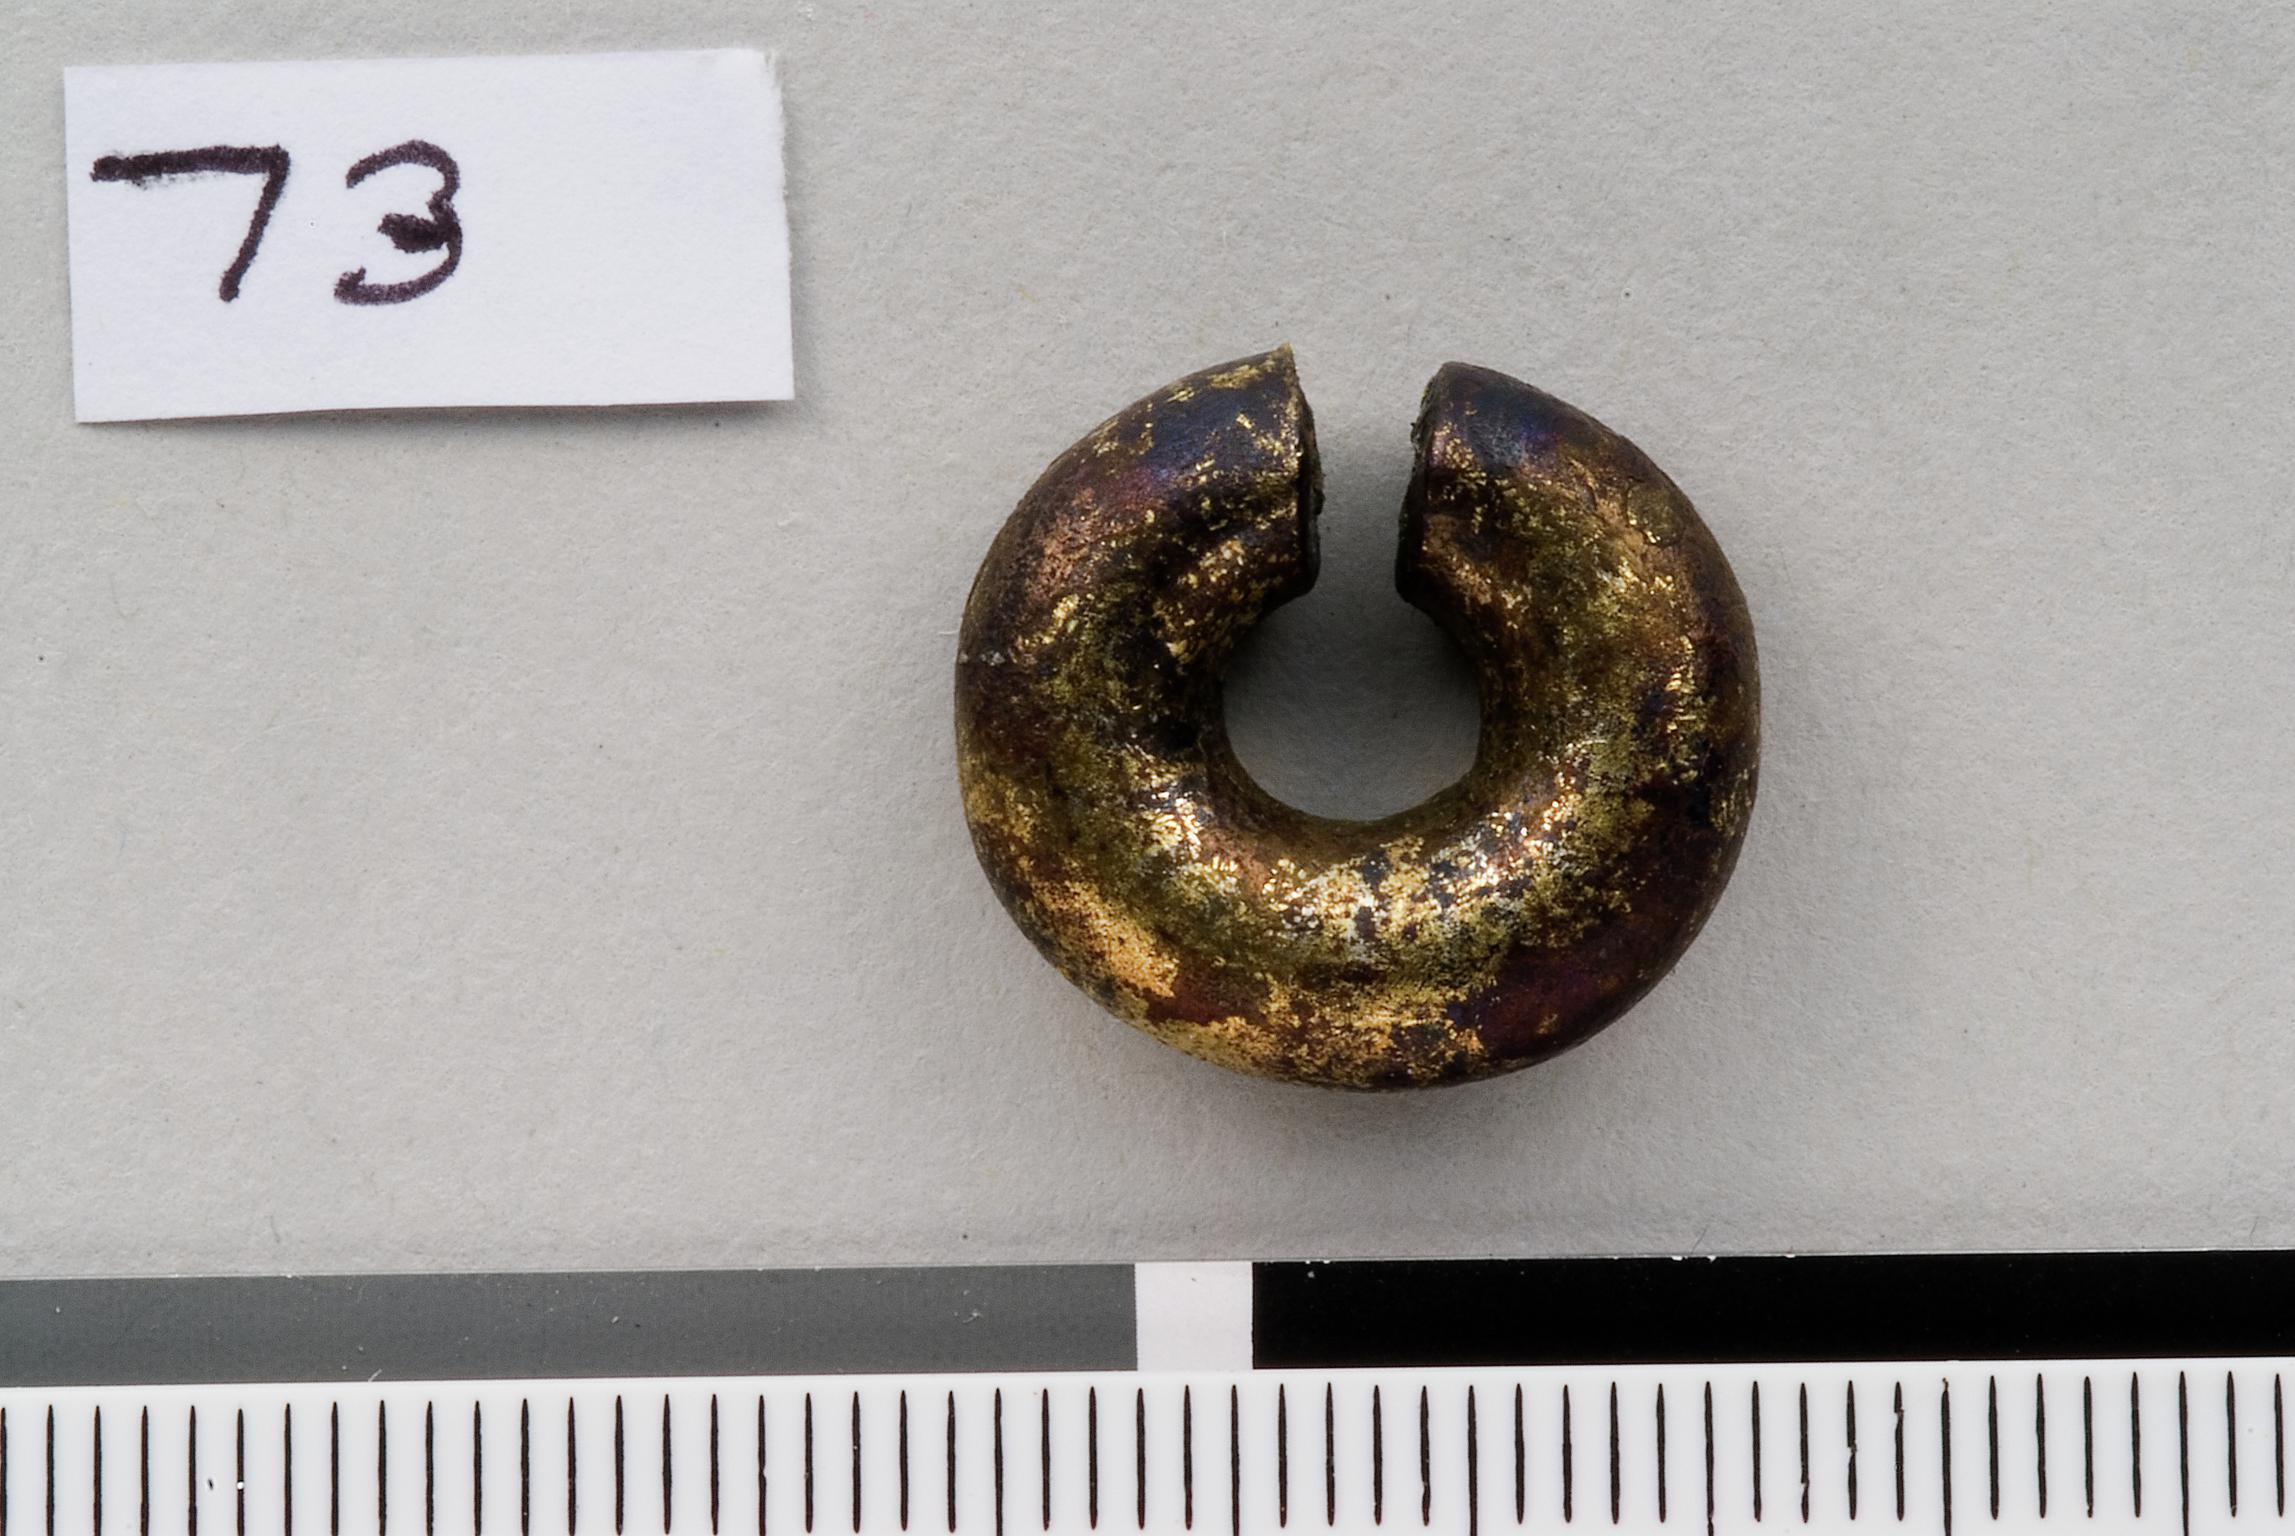 Late Bronze Age gold hair ring